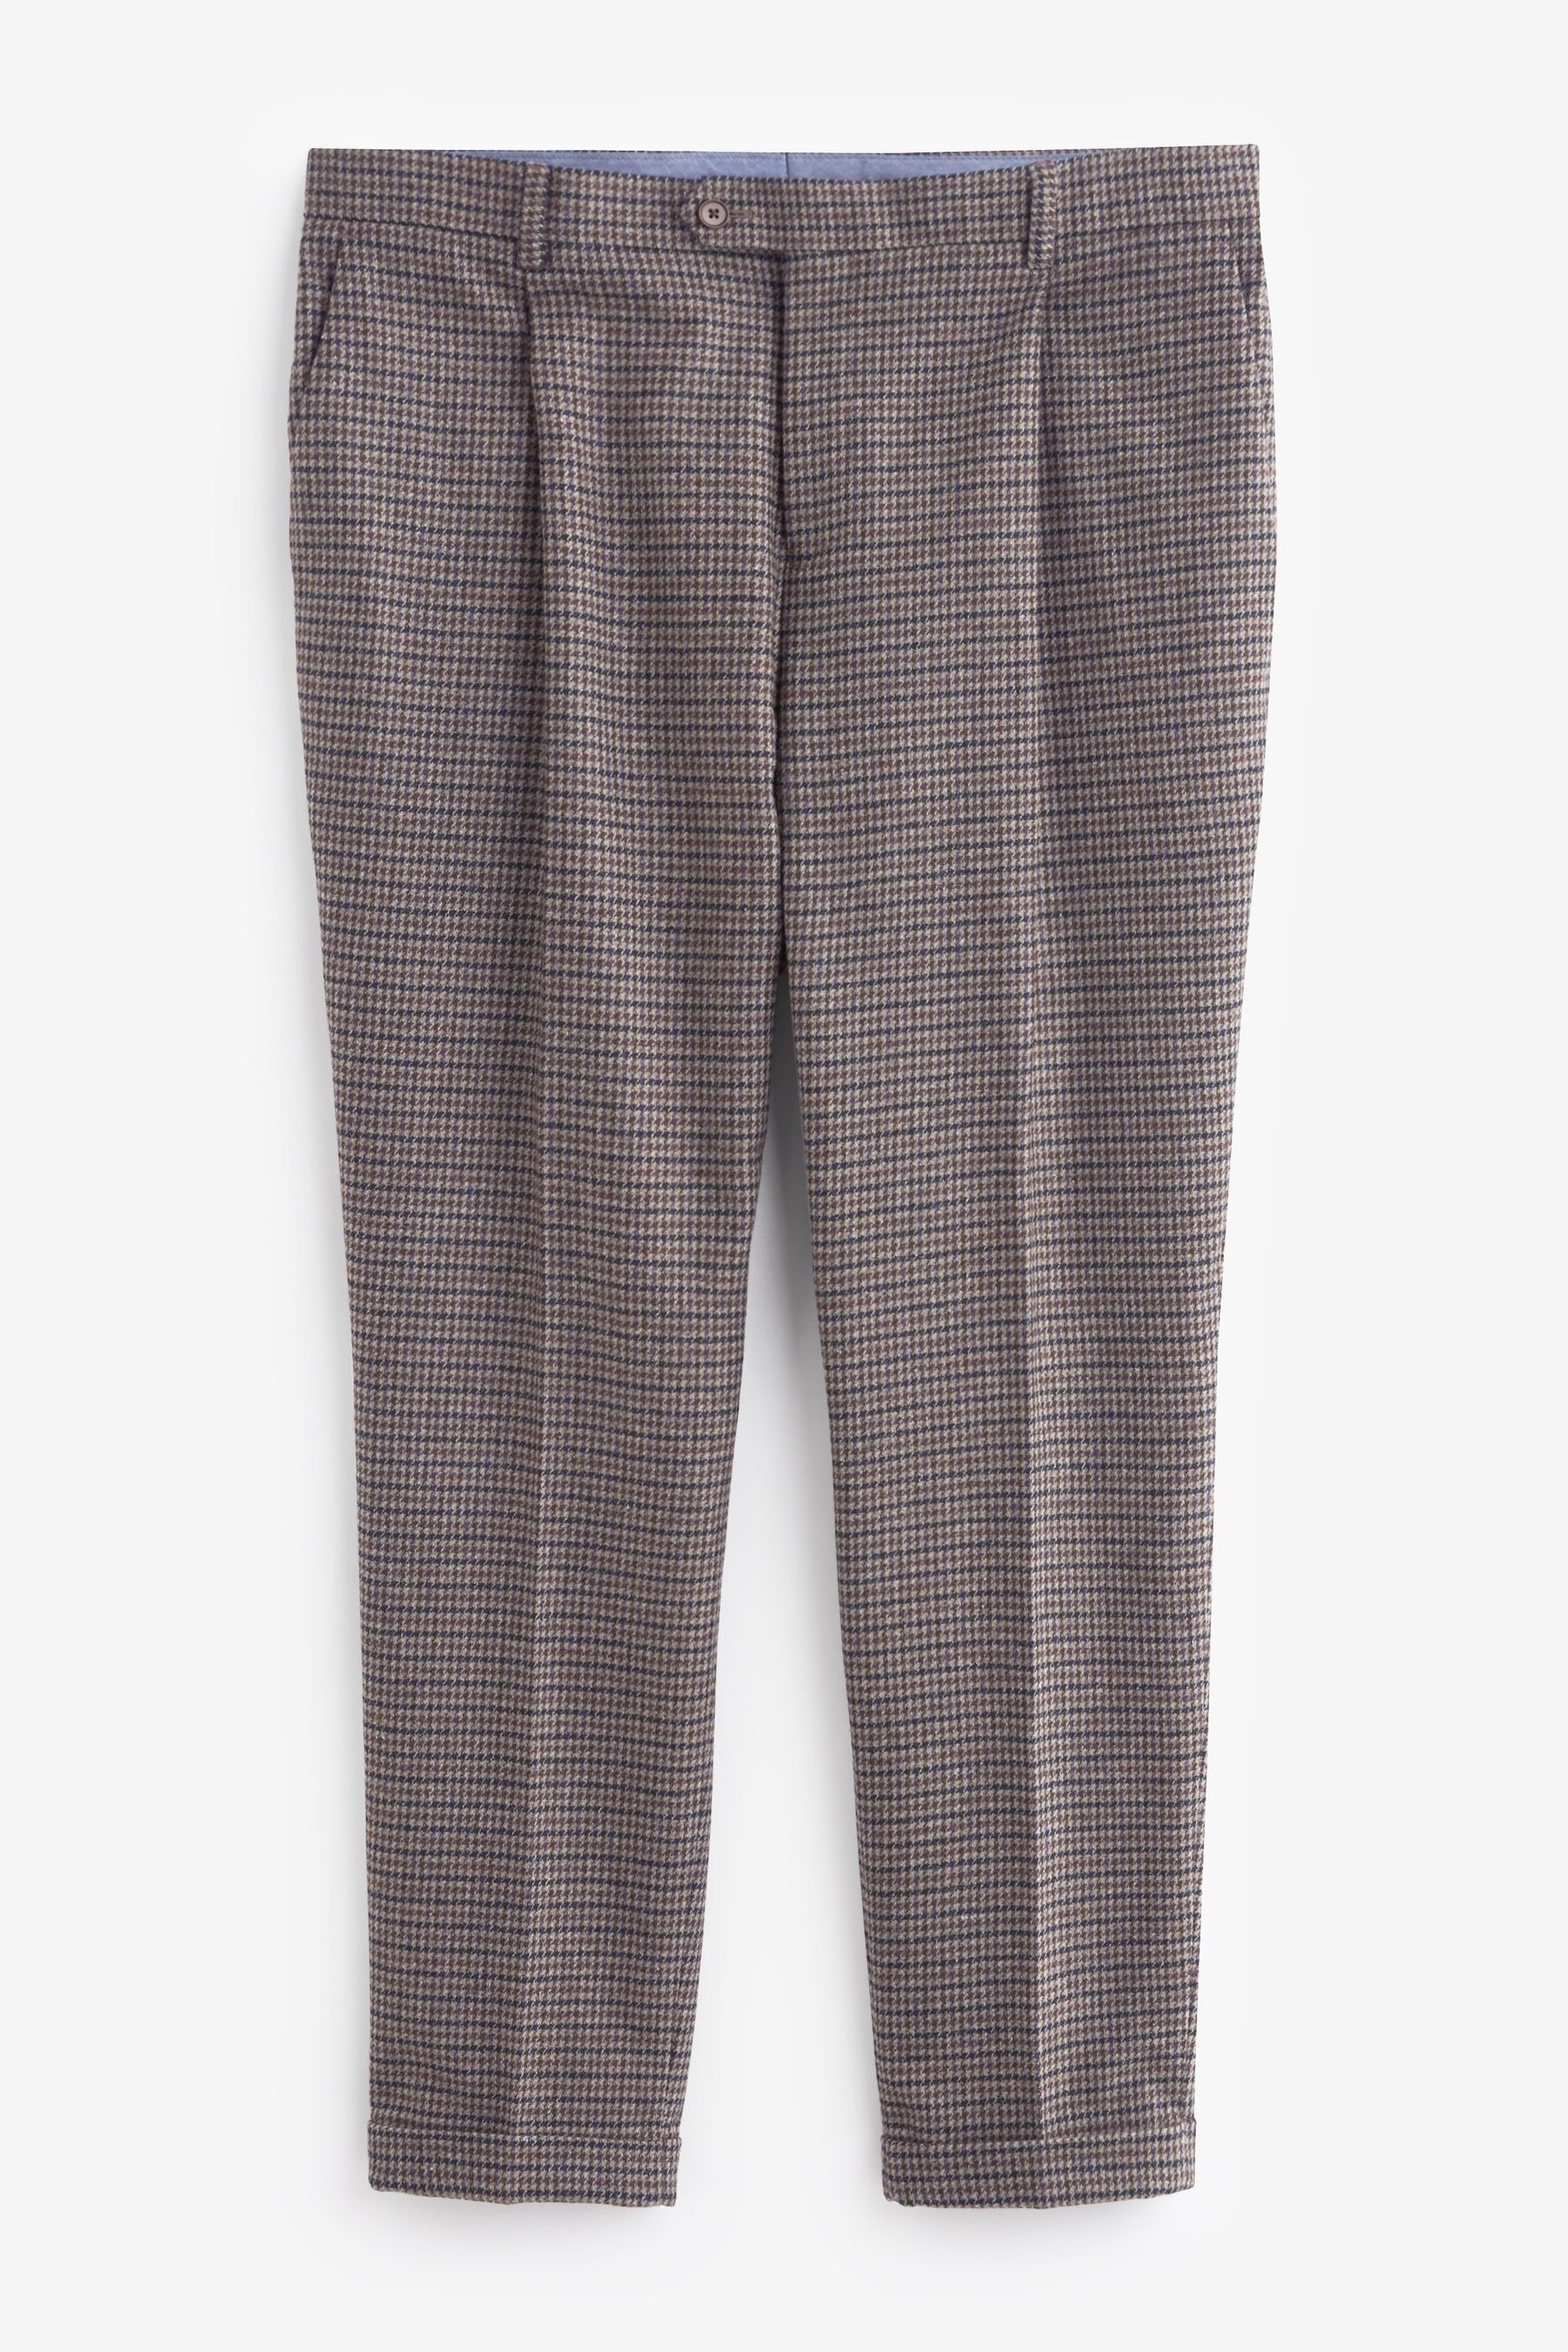 Next Anzughose Anzug mit Hahnentrittmuster: Relaxed Fit Hose (1-tlg) Brown